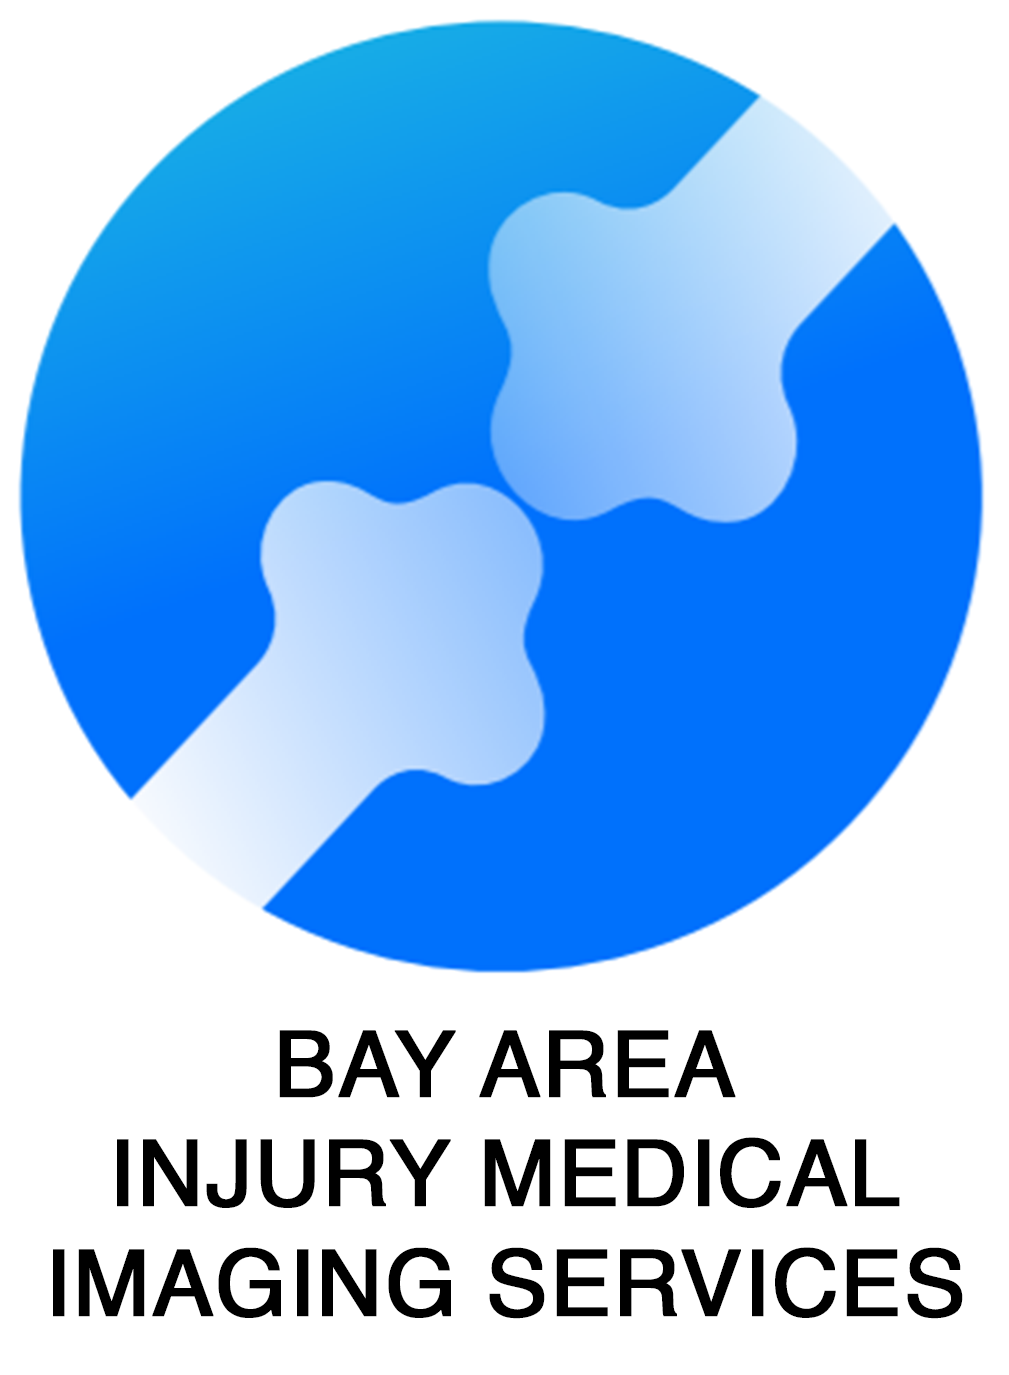 BAY AREA INJURY MEDICAL IMAGING SERVICES (MOUNTAIN VIEW)